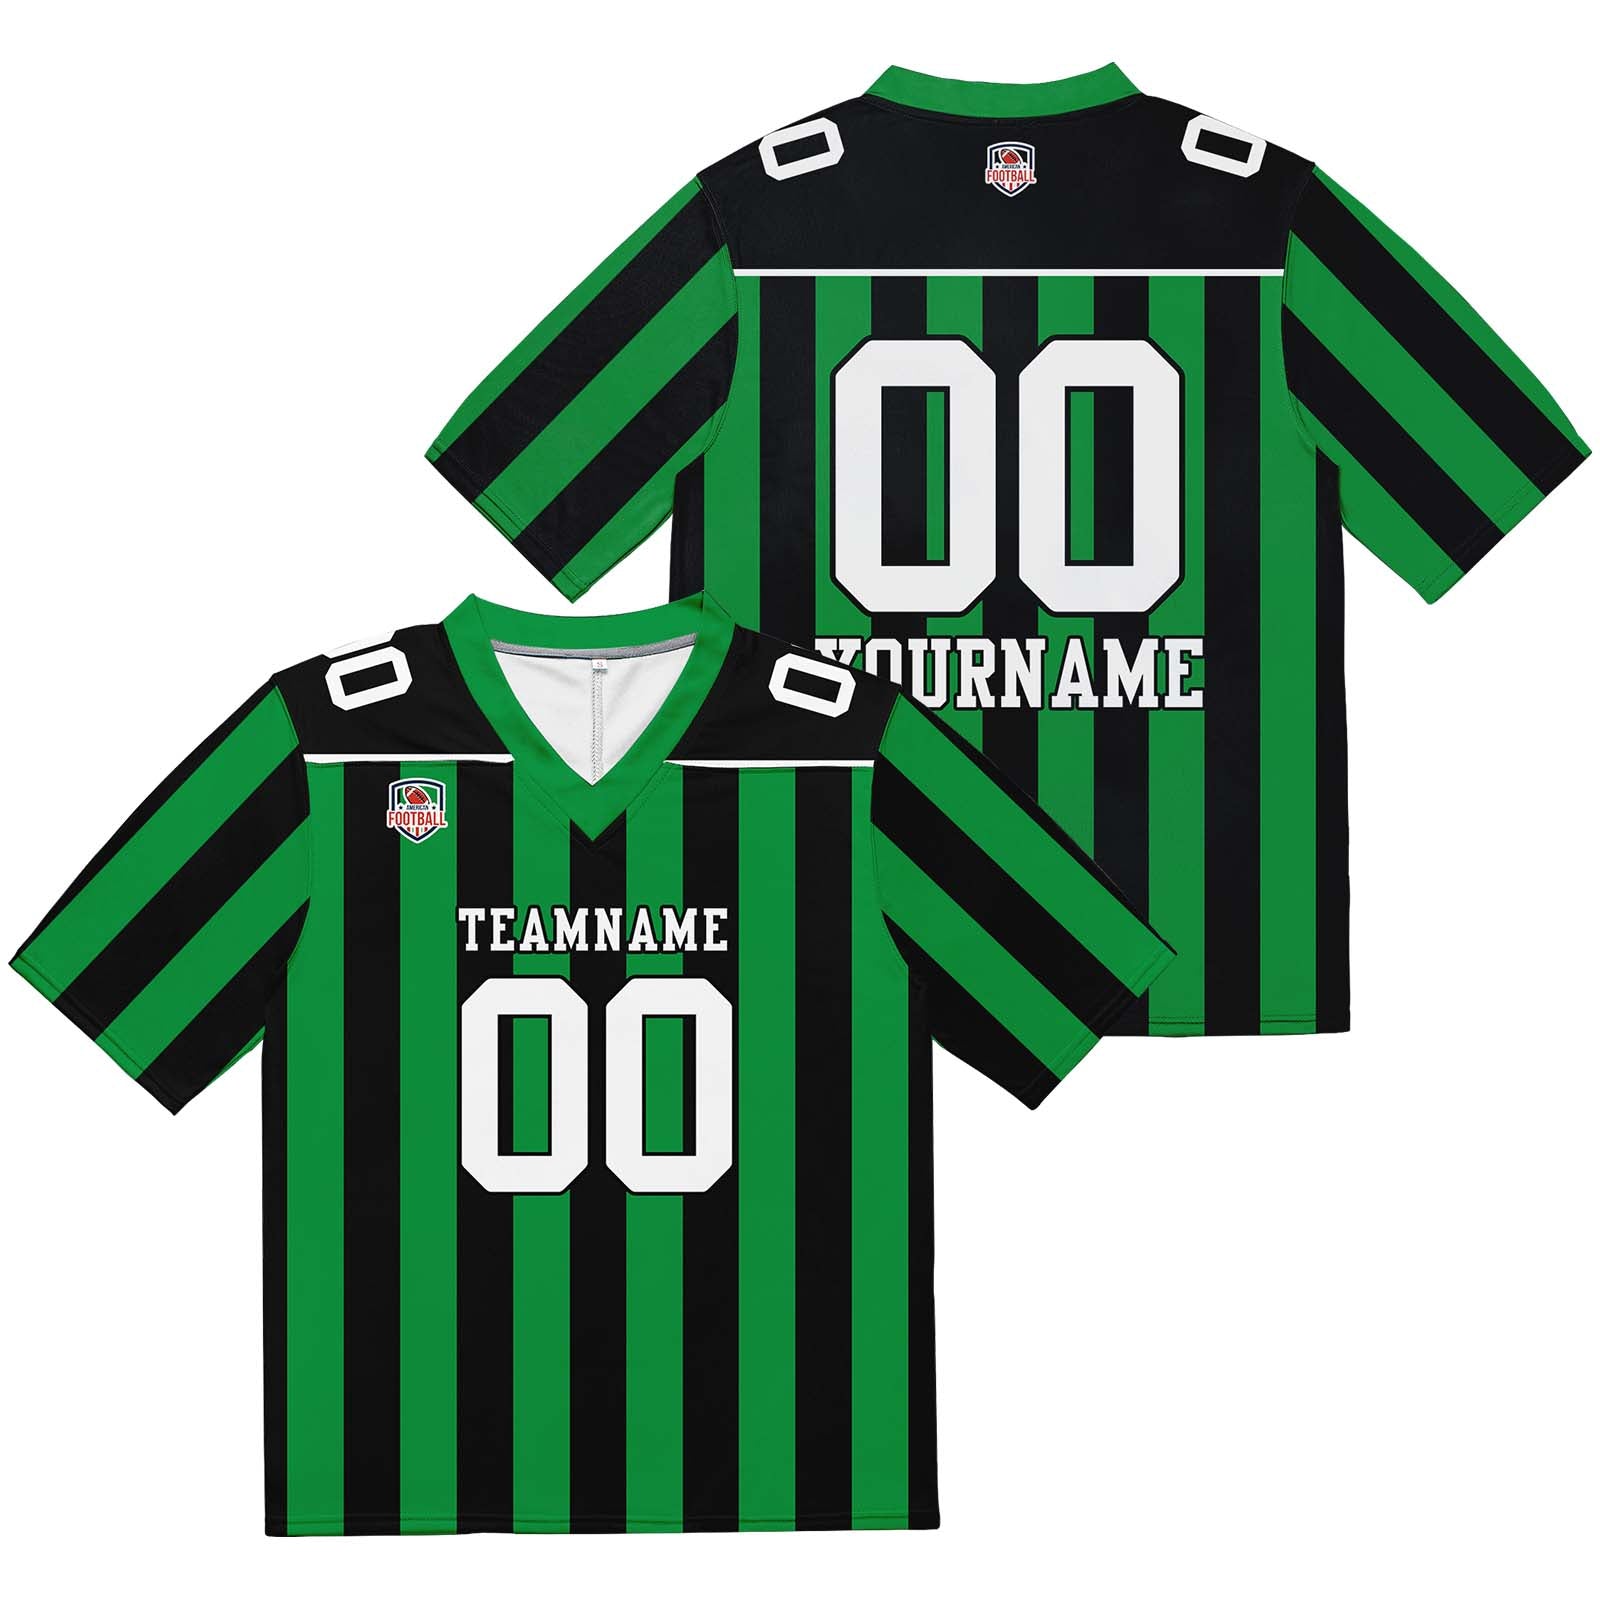 Custom Football Jersey Shirt Personalized Stitched Printed Team Name Number Green & Black